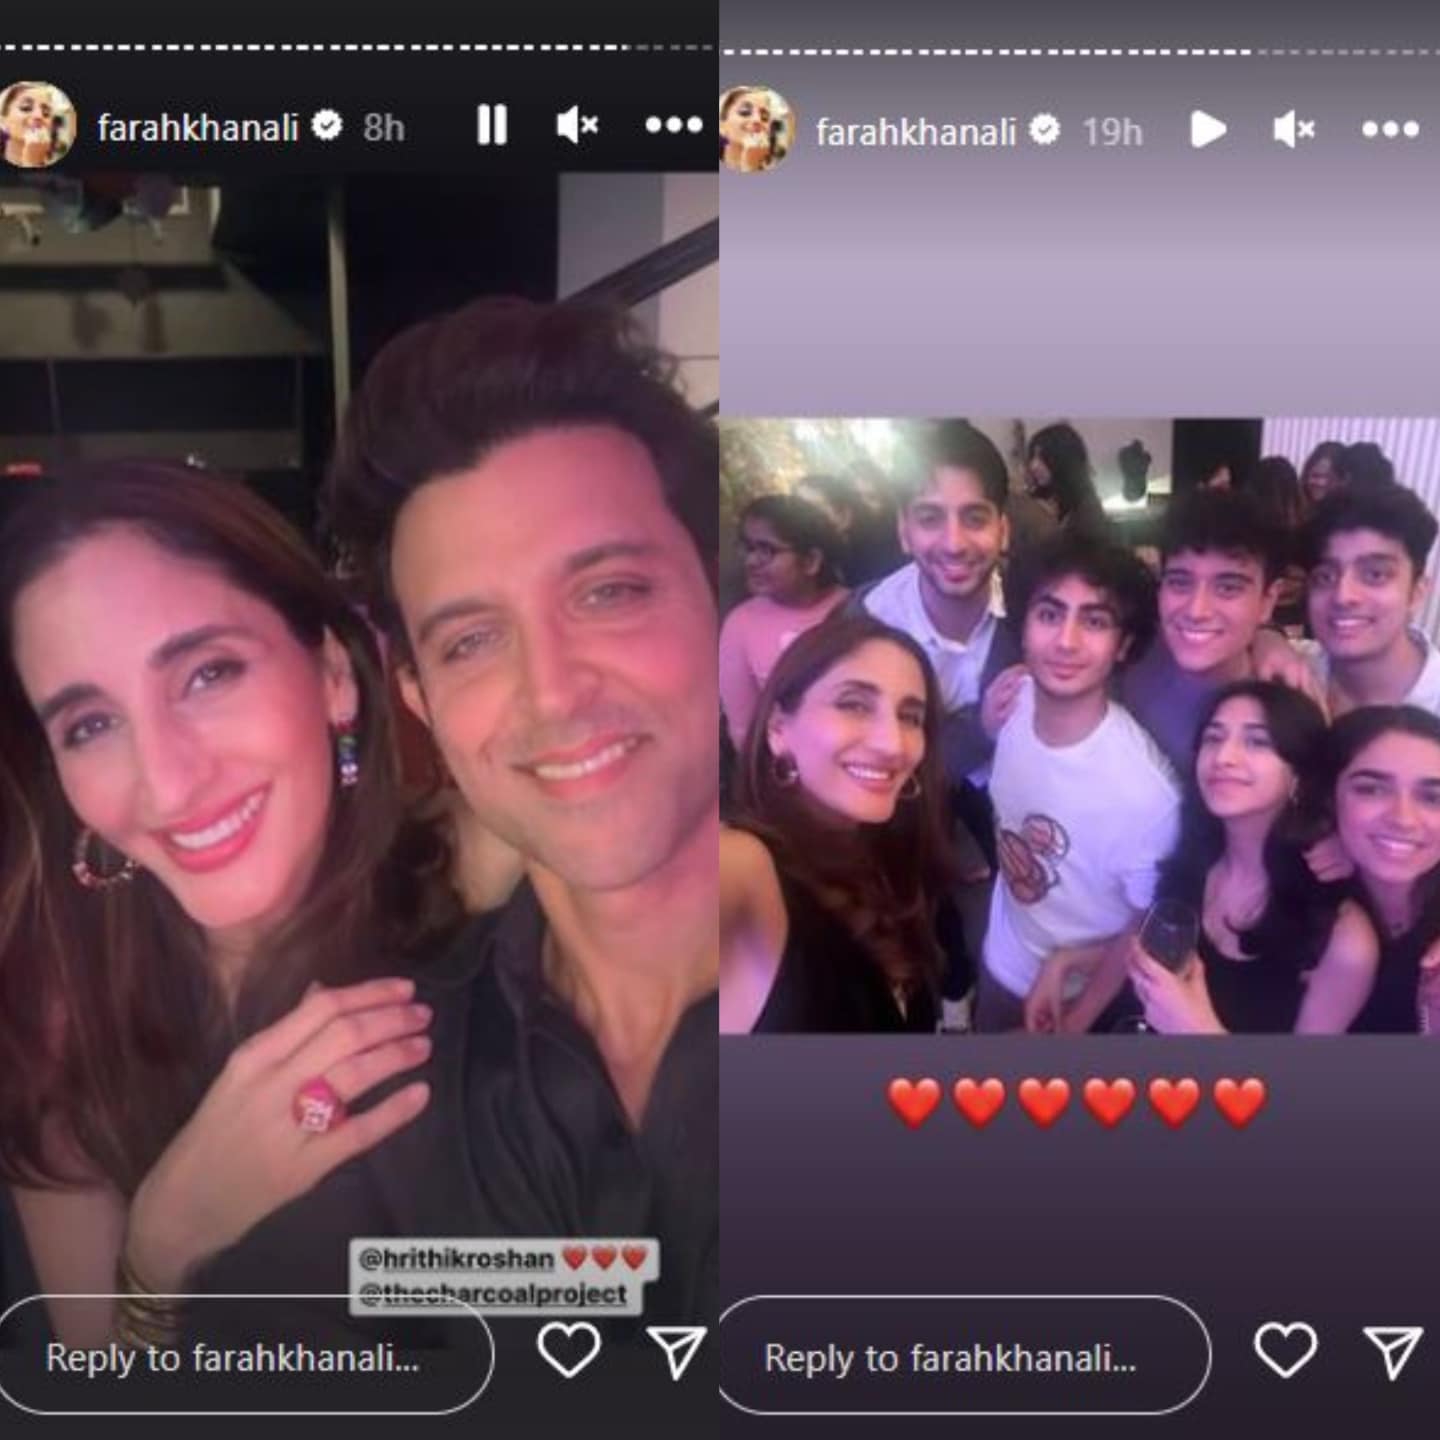 Farah also posted a photo with Hrithik.